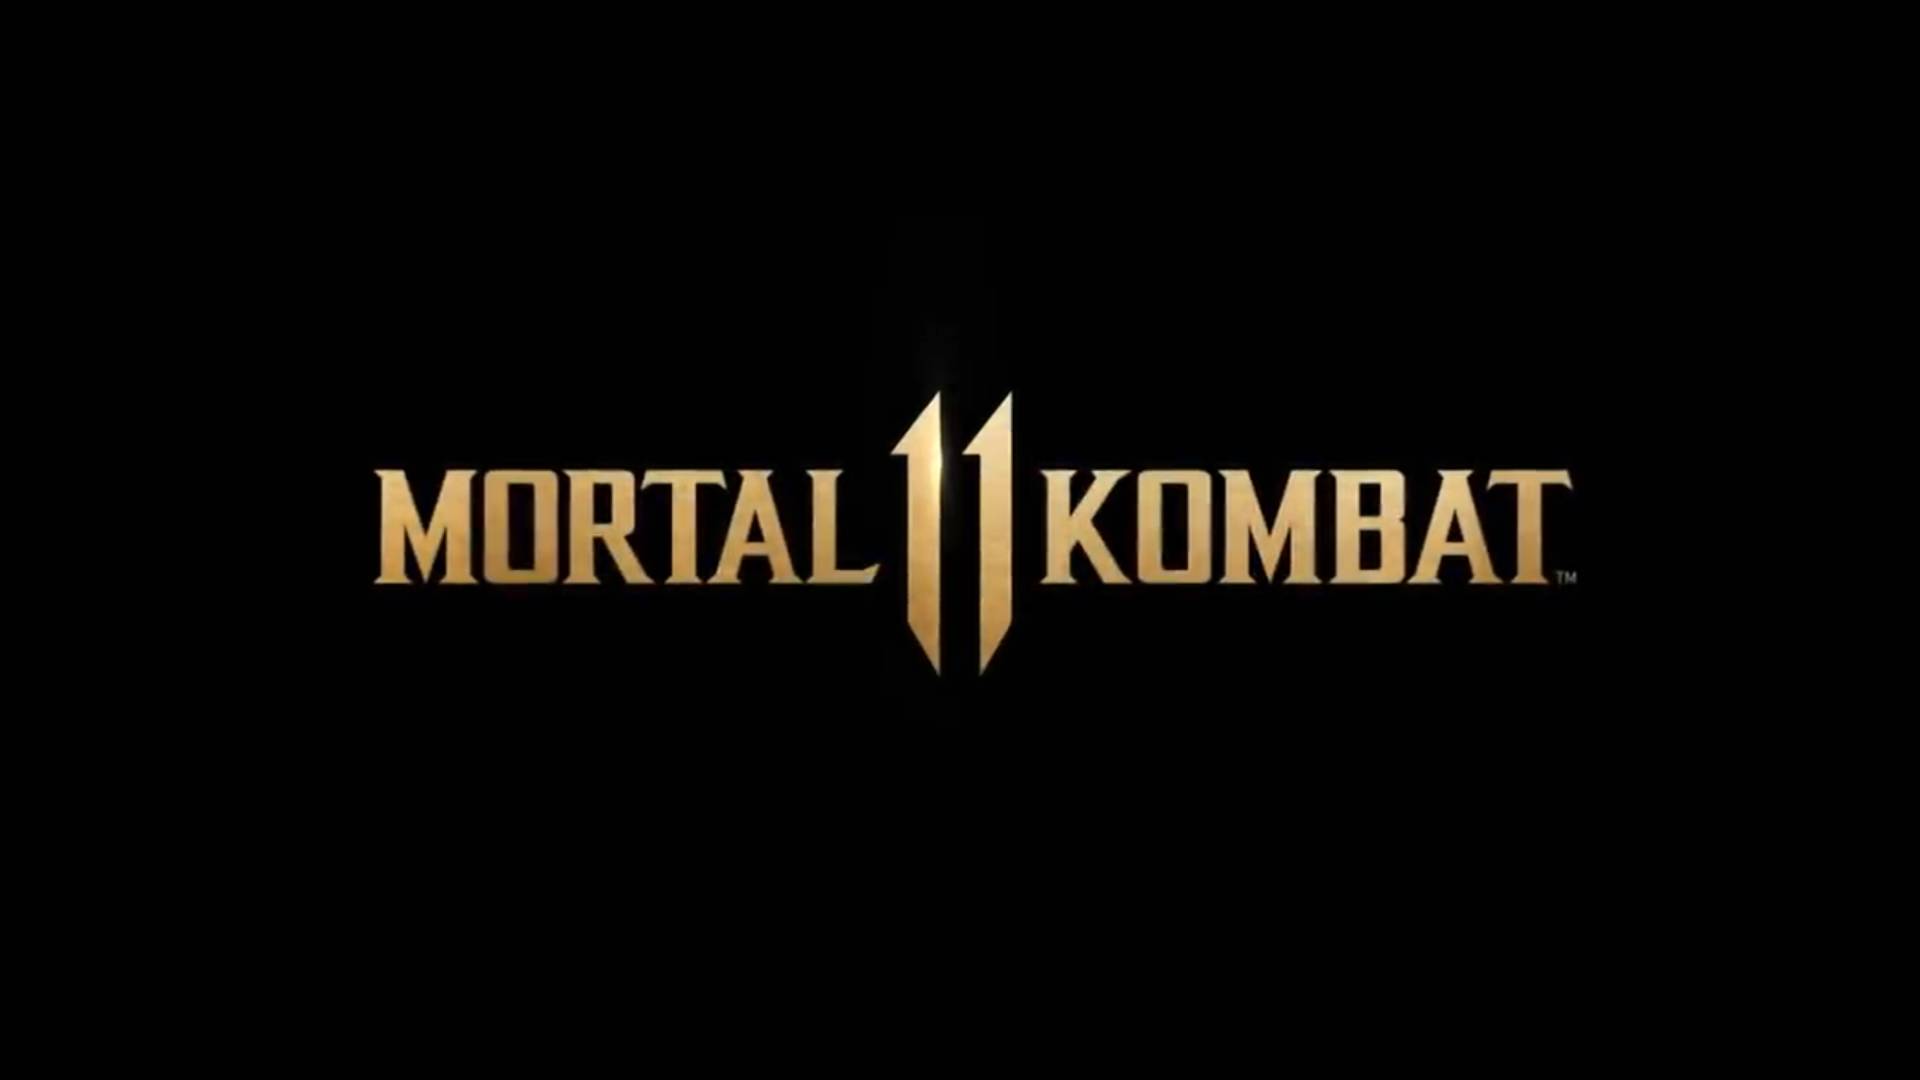 Mortal Kombat 11 story trailer is out